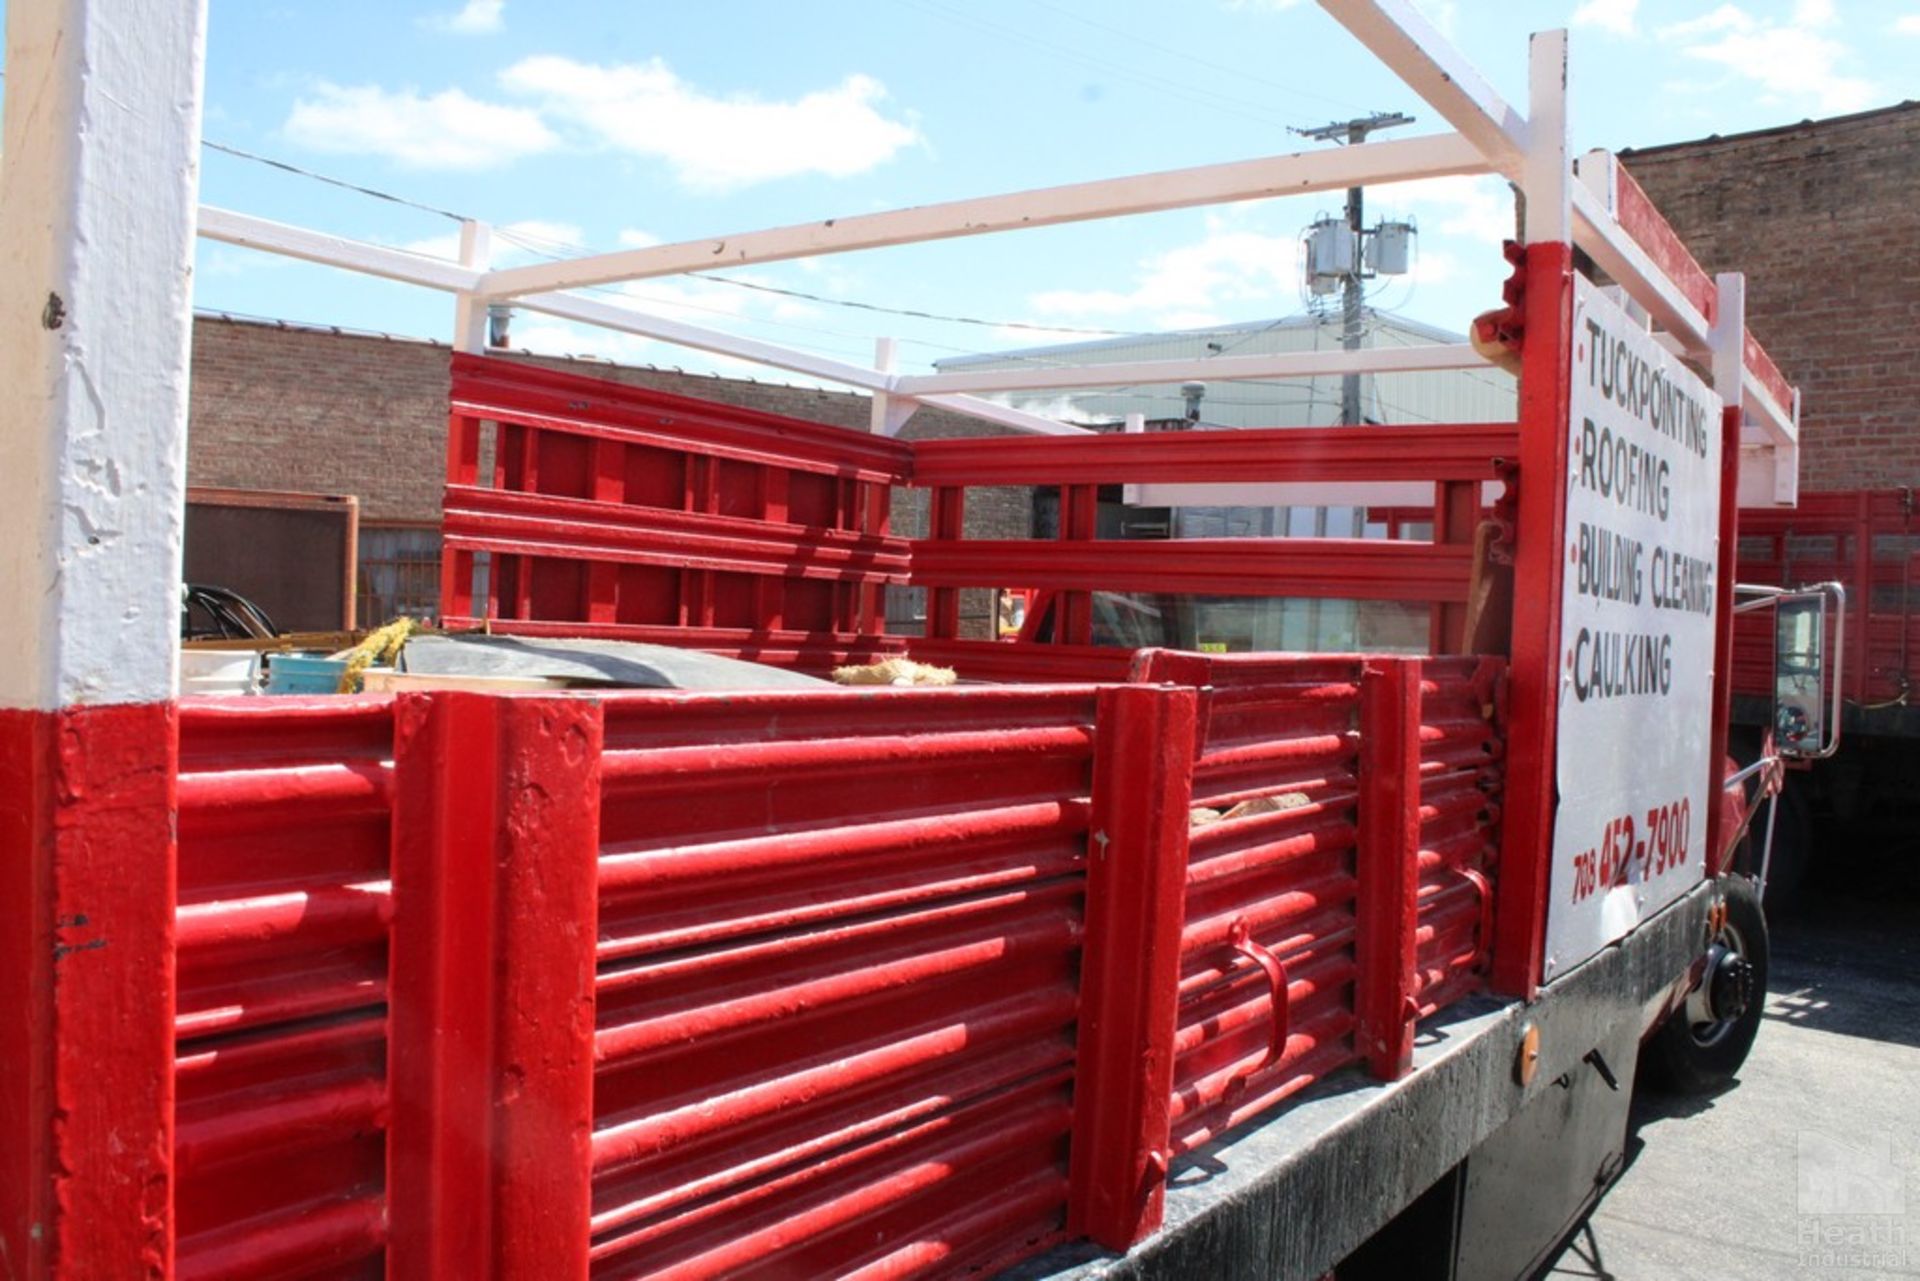 1991 GMC MODEL 3500 STAKE TRUCK, VIN: 1GDJC34K6ME507692, 12' STEEL DECK WITH REMOVABLE GUARDS, - Image 3 of 7